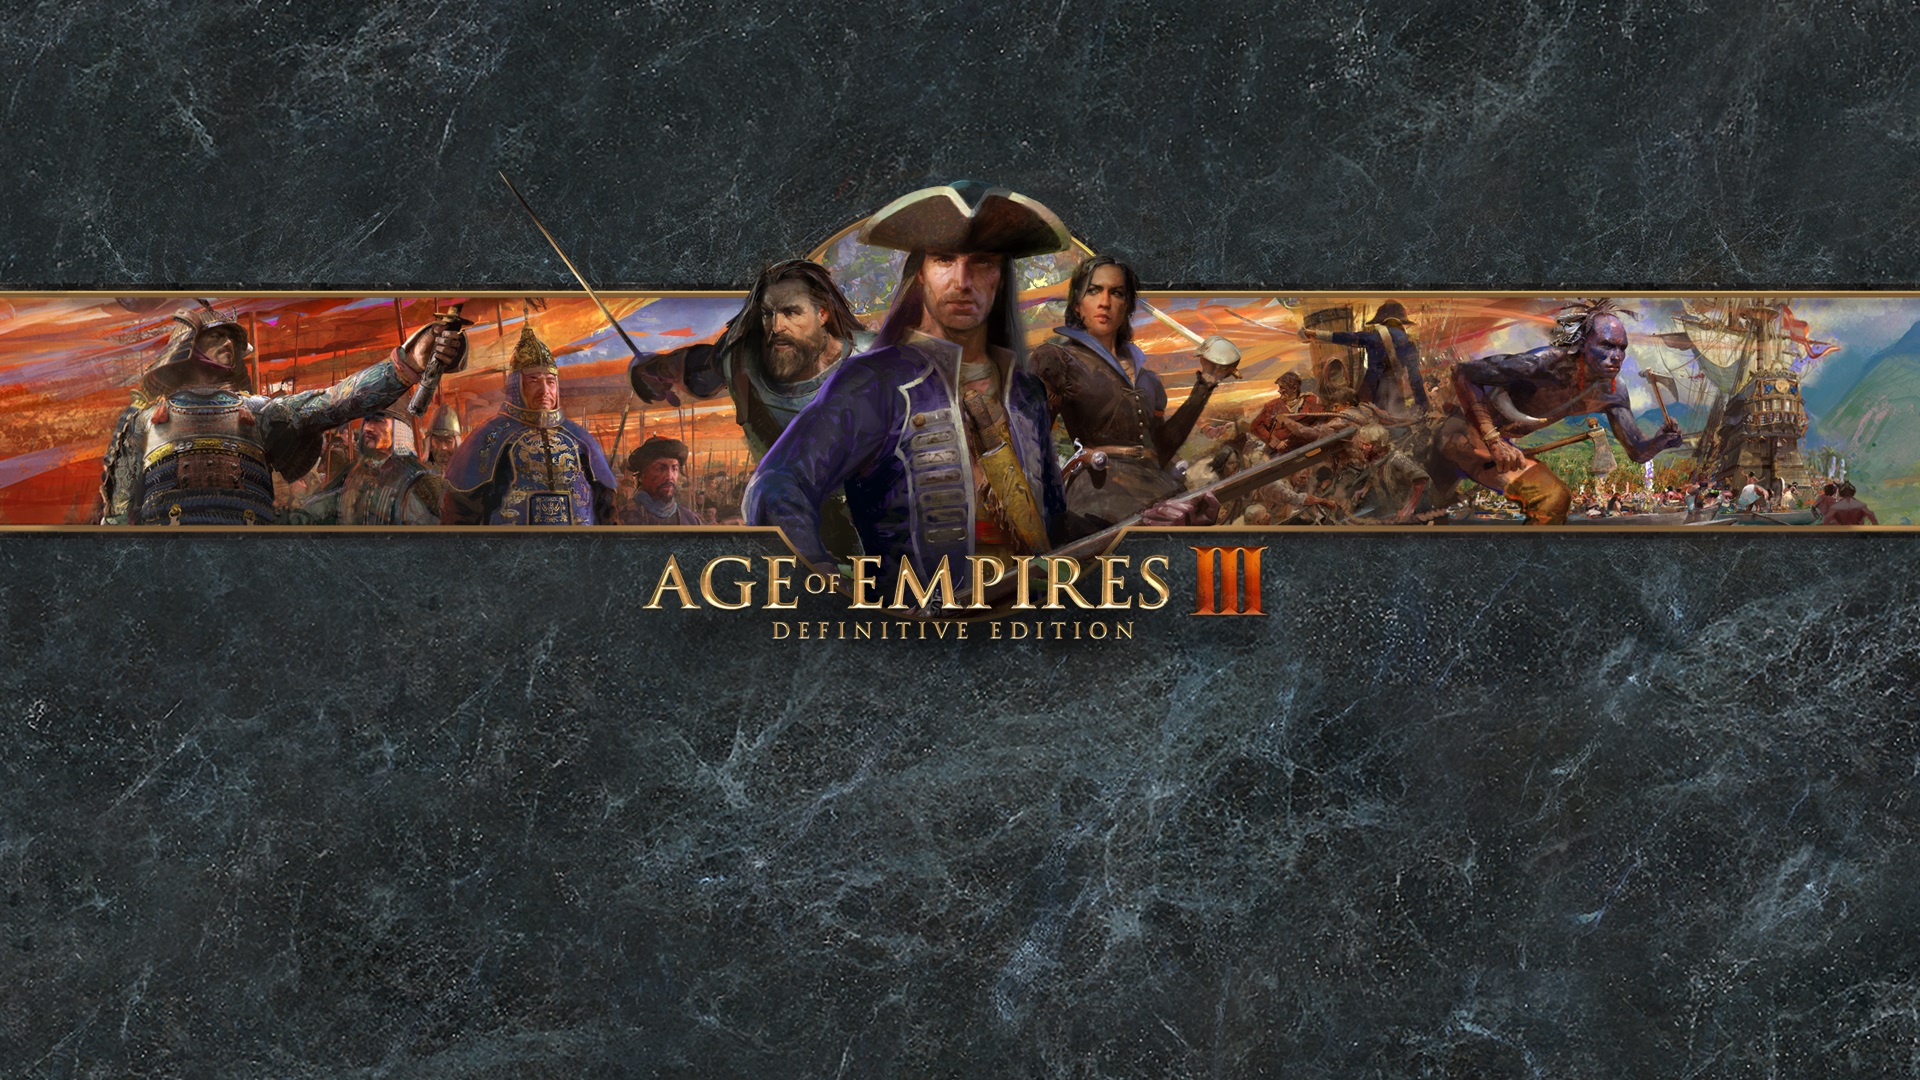 Age of empires 3 in steam фото 34